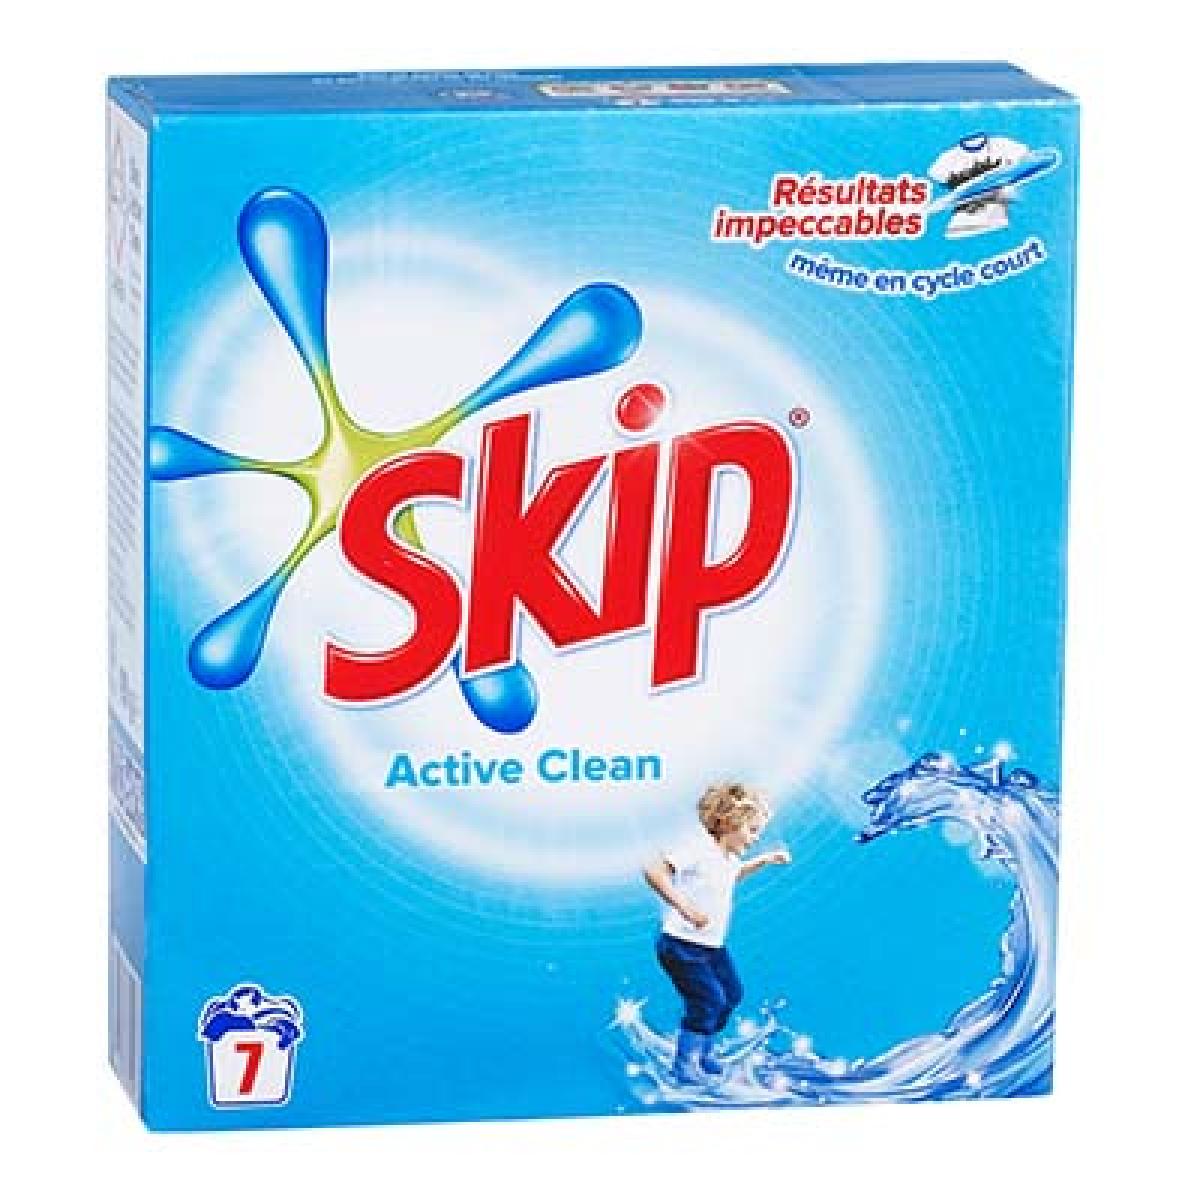 SKIP PDRE ACT.CLEAN 27MES